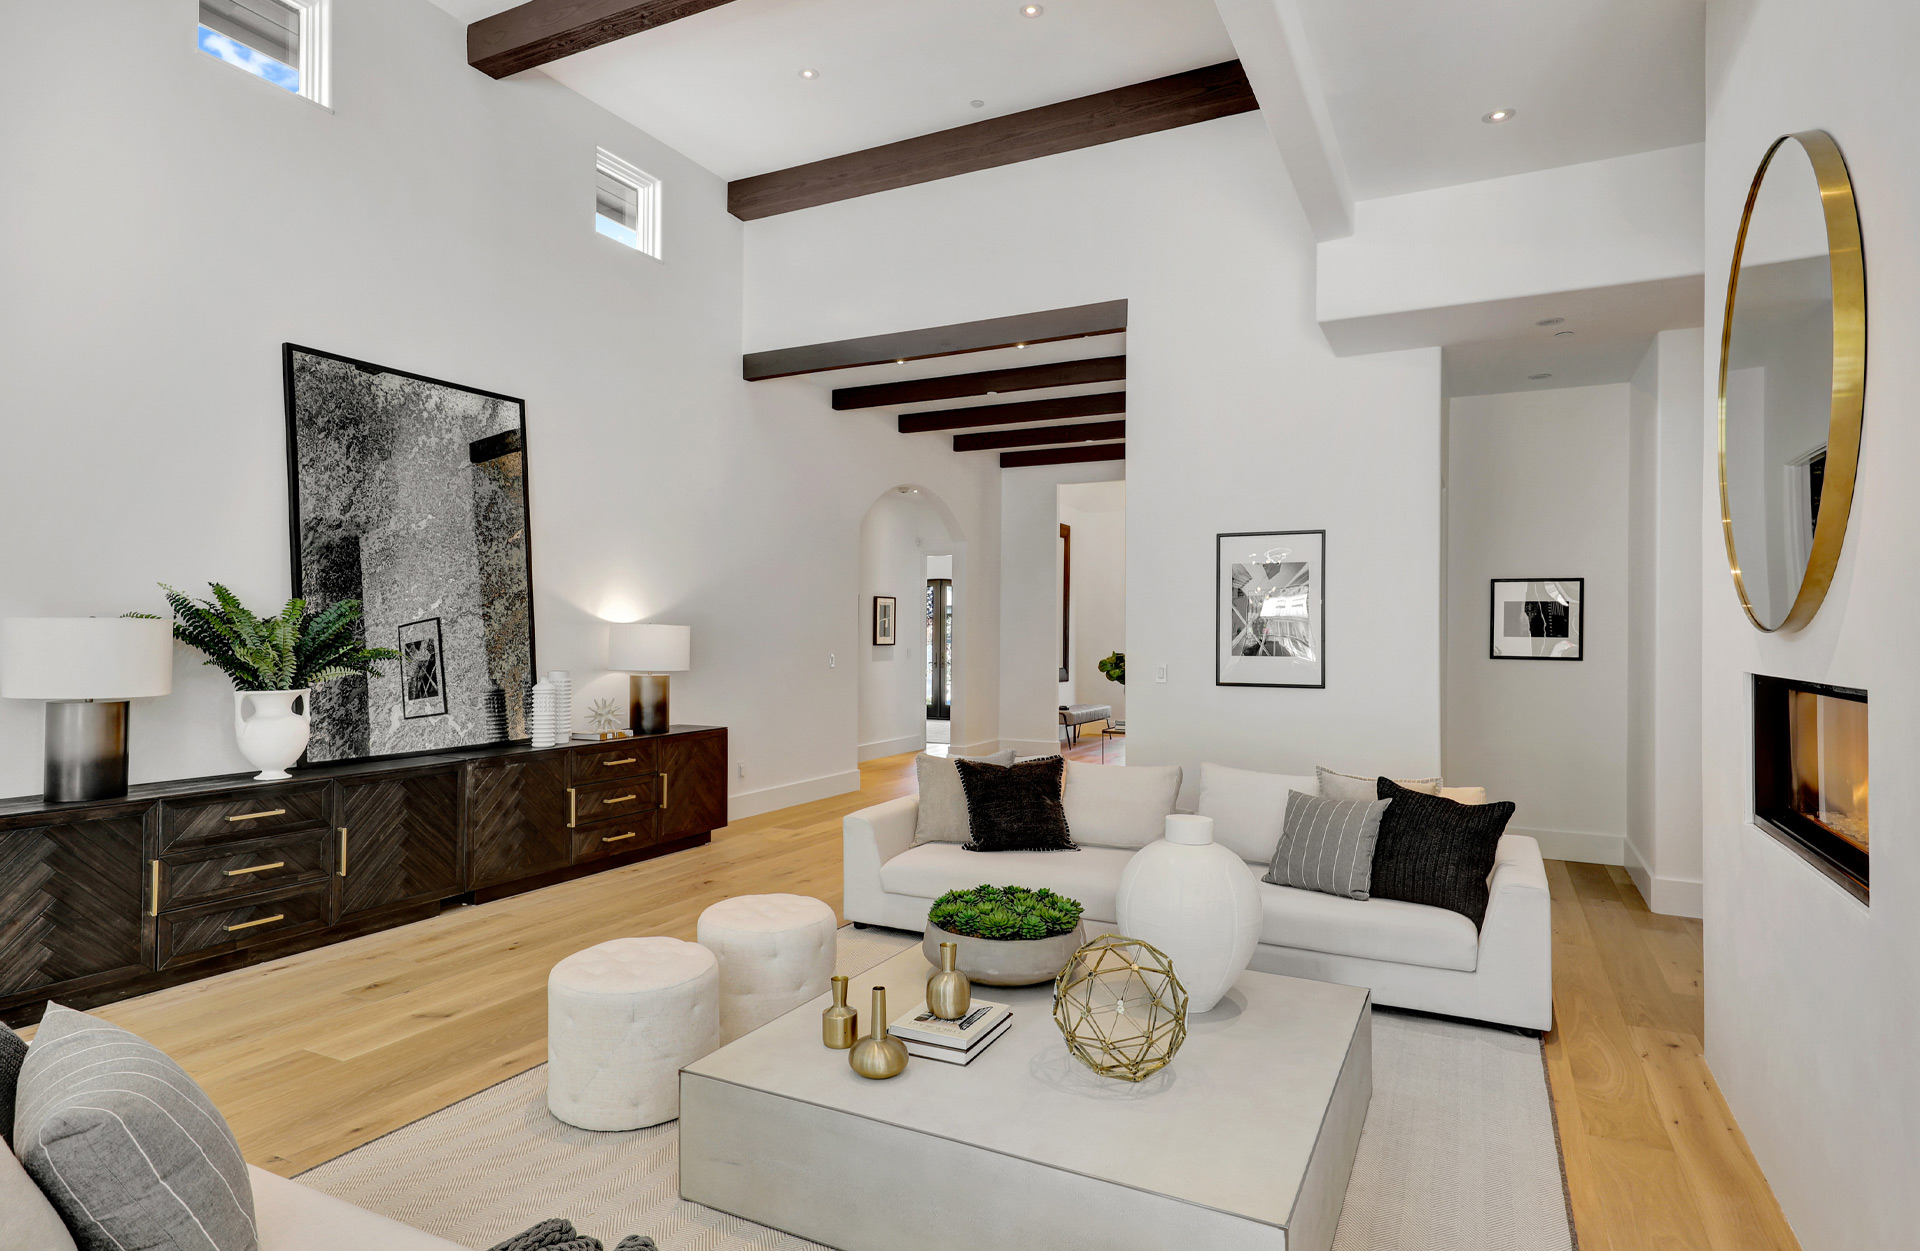 Display Image for Interior of modern home